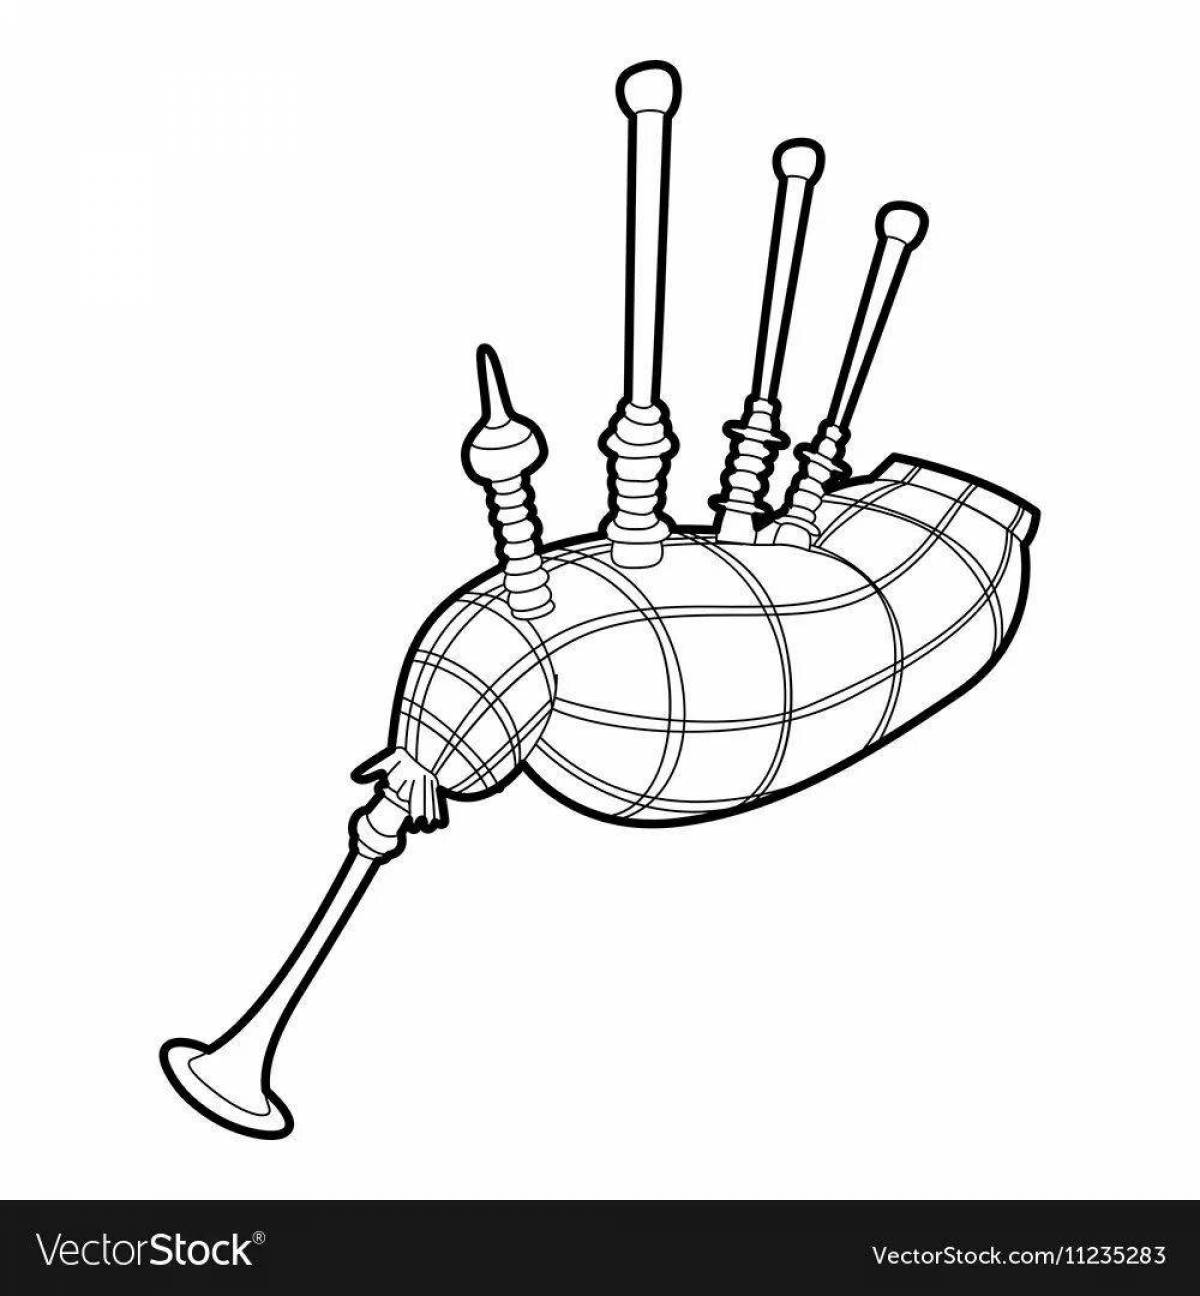 Exciting bagpipe coloring